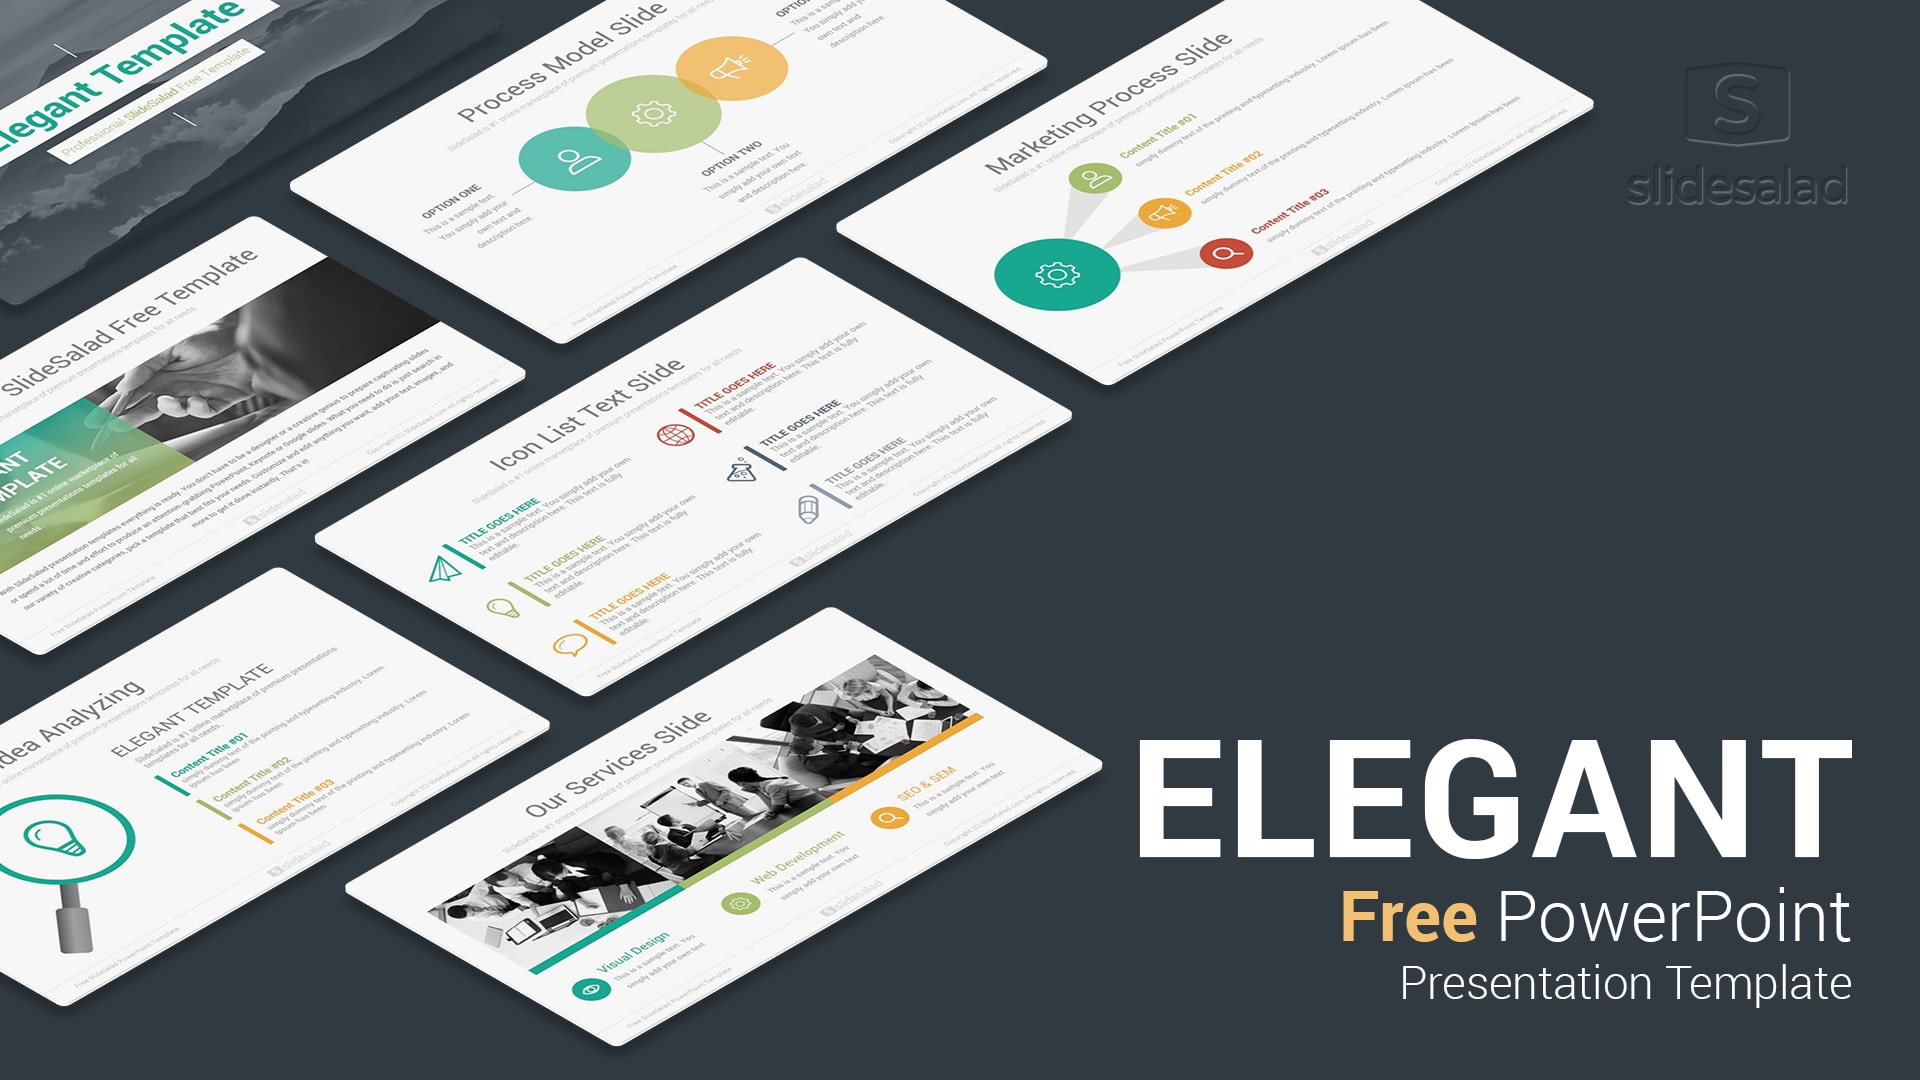 20+ Best Free PowerPoint Presentation Templates to Download in 2023